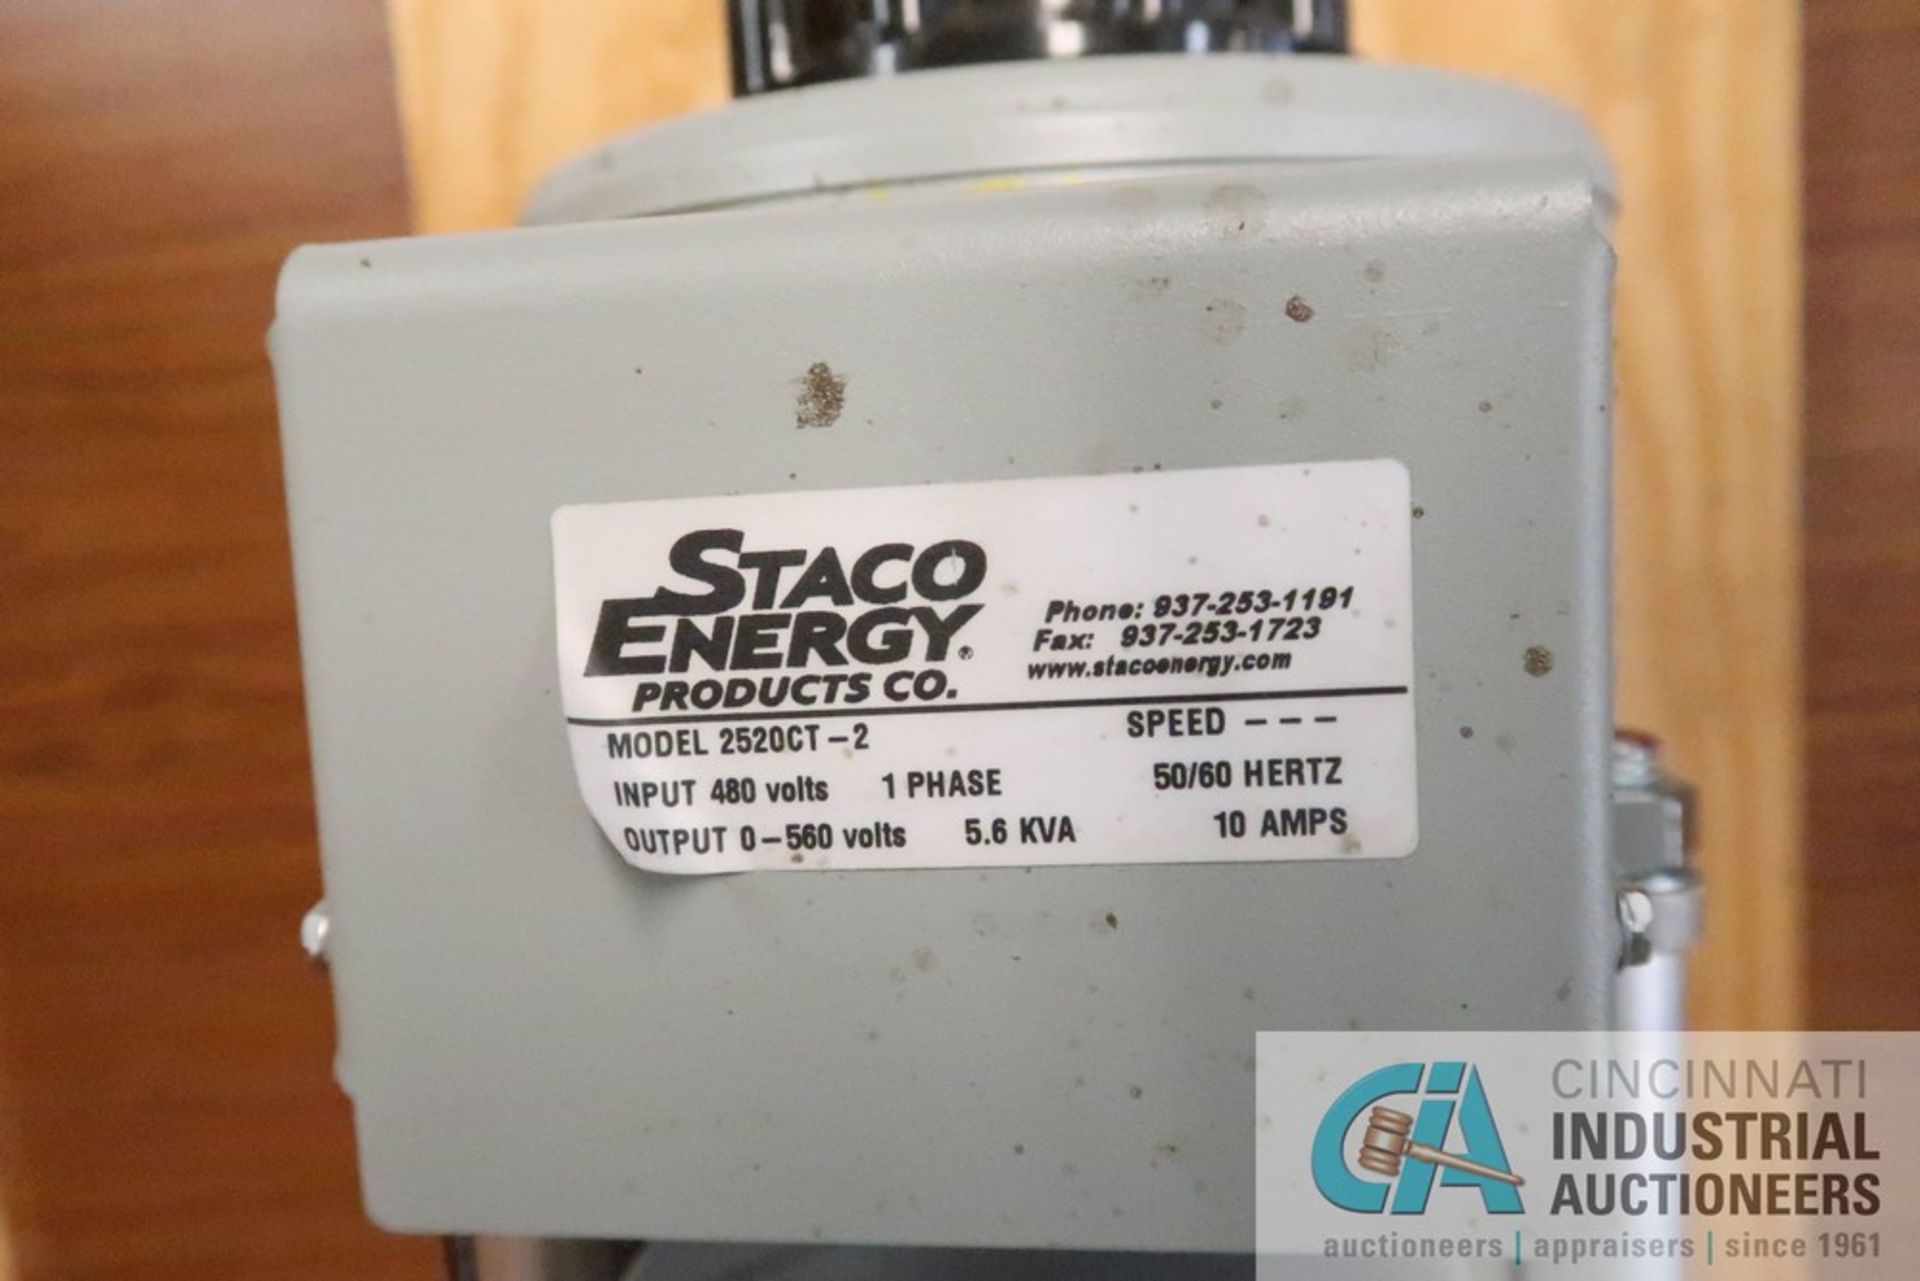 STACO ENERGY PRODUCTS CO. MODEL 2520CT-2 VARIABLE AUTO TRANSFORMER; INPUT 480-VOLT, OUTPUT 0-560- - Image 2 of 2